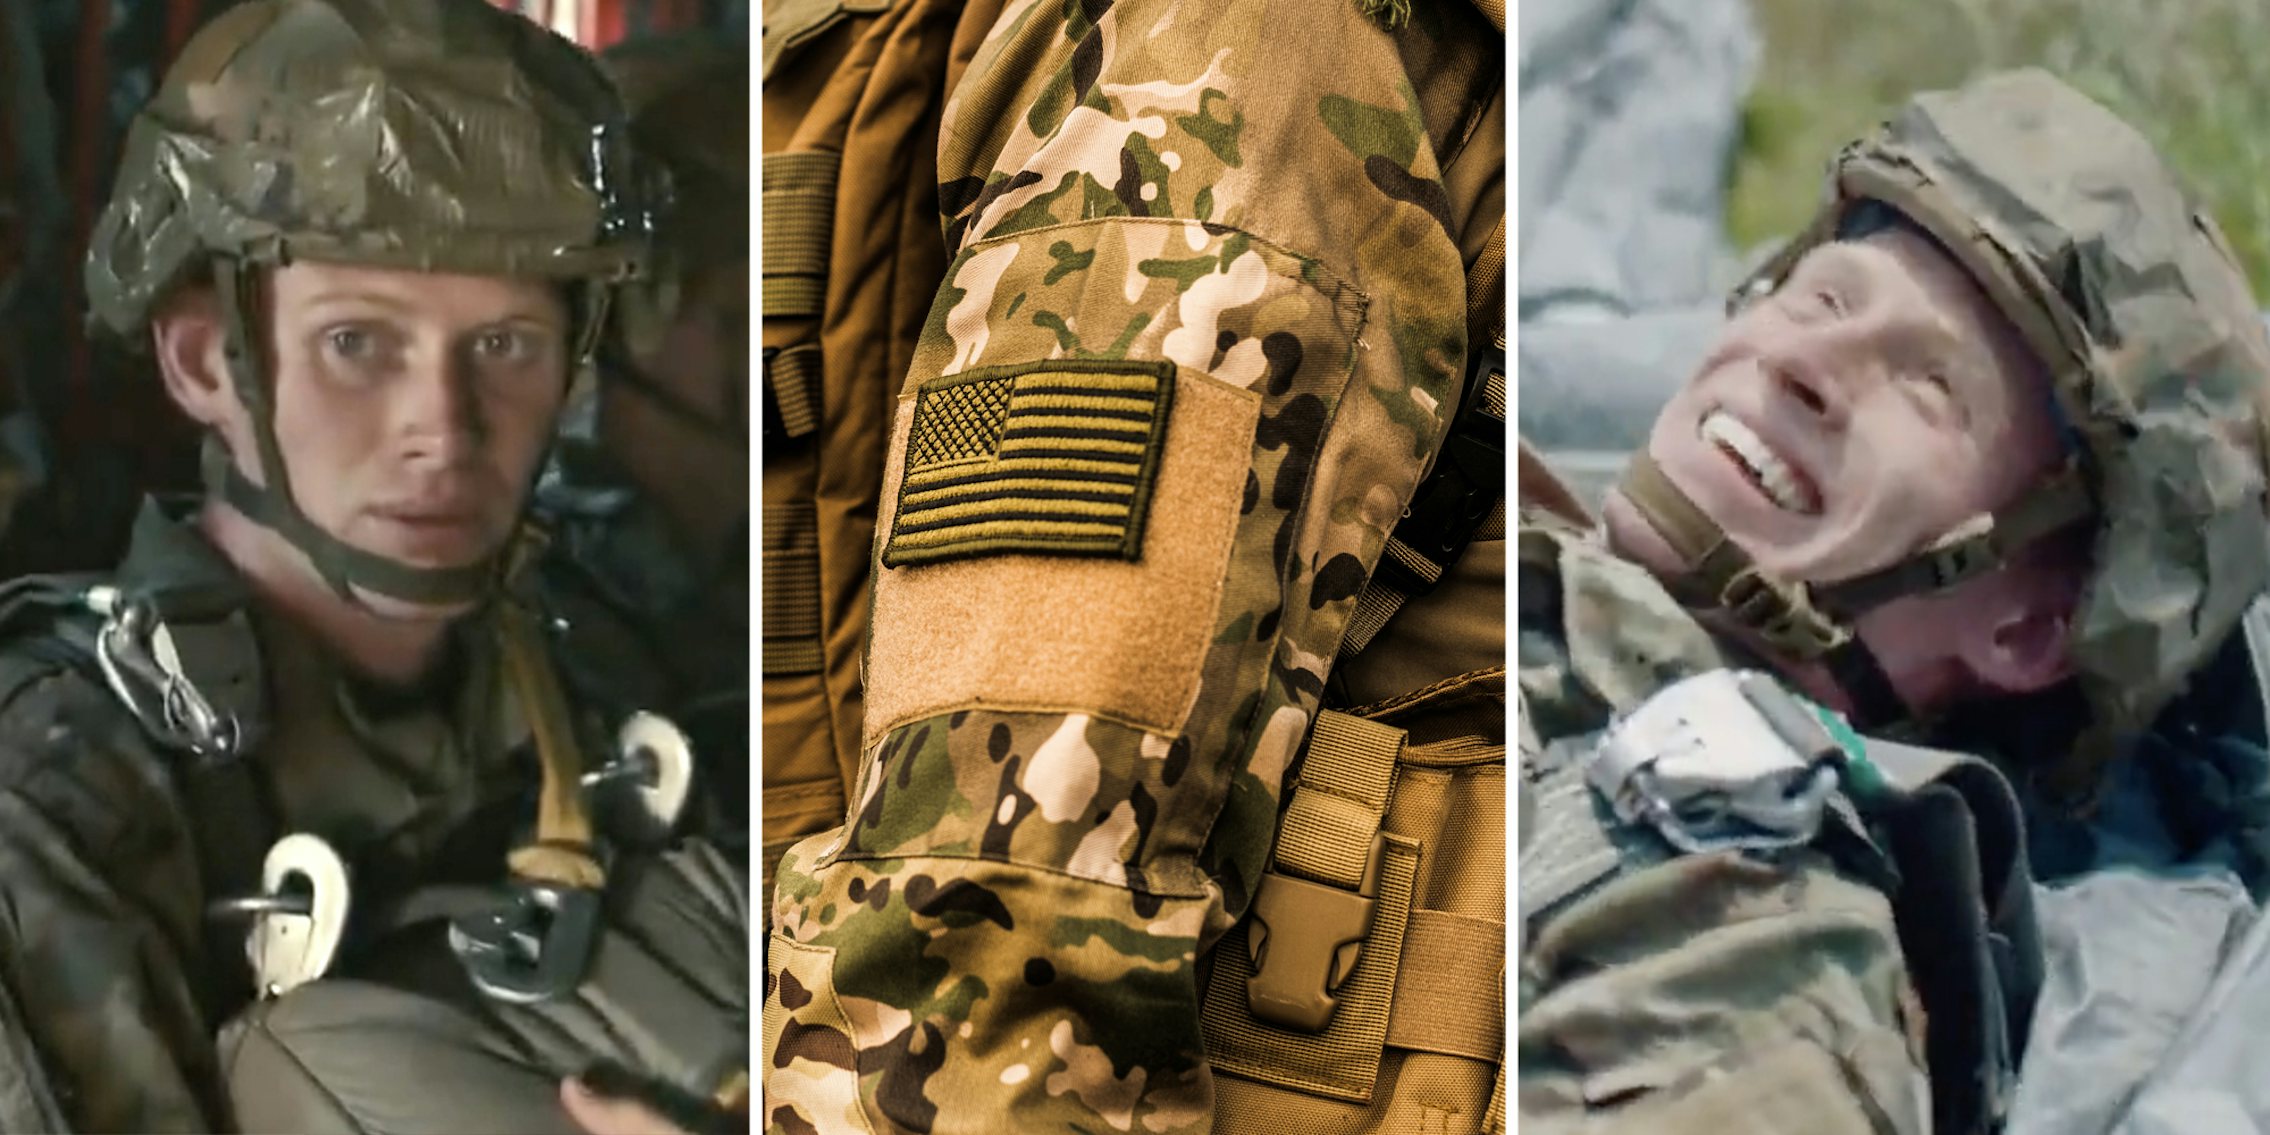 Soldier scared(l), Close up of uniform(m), Soldier smiling(r0